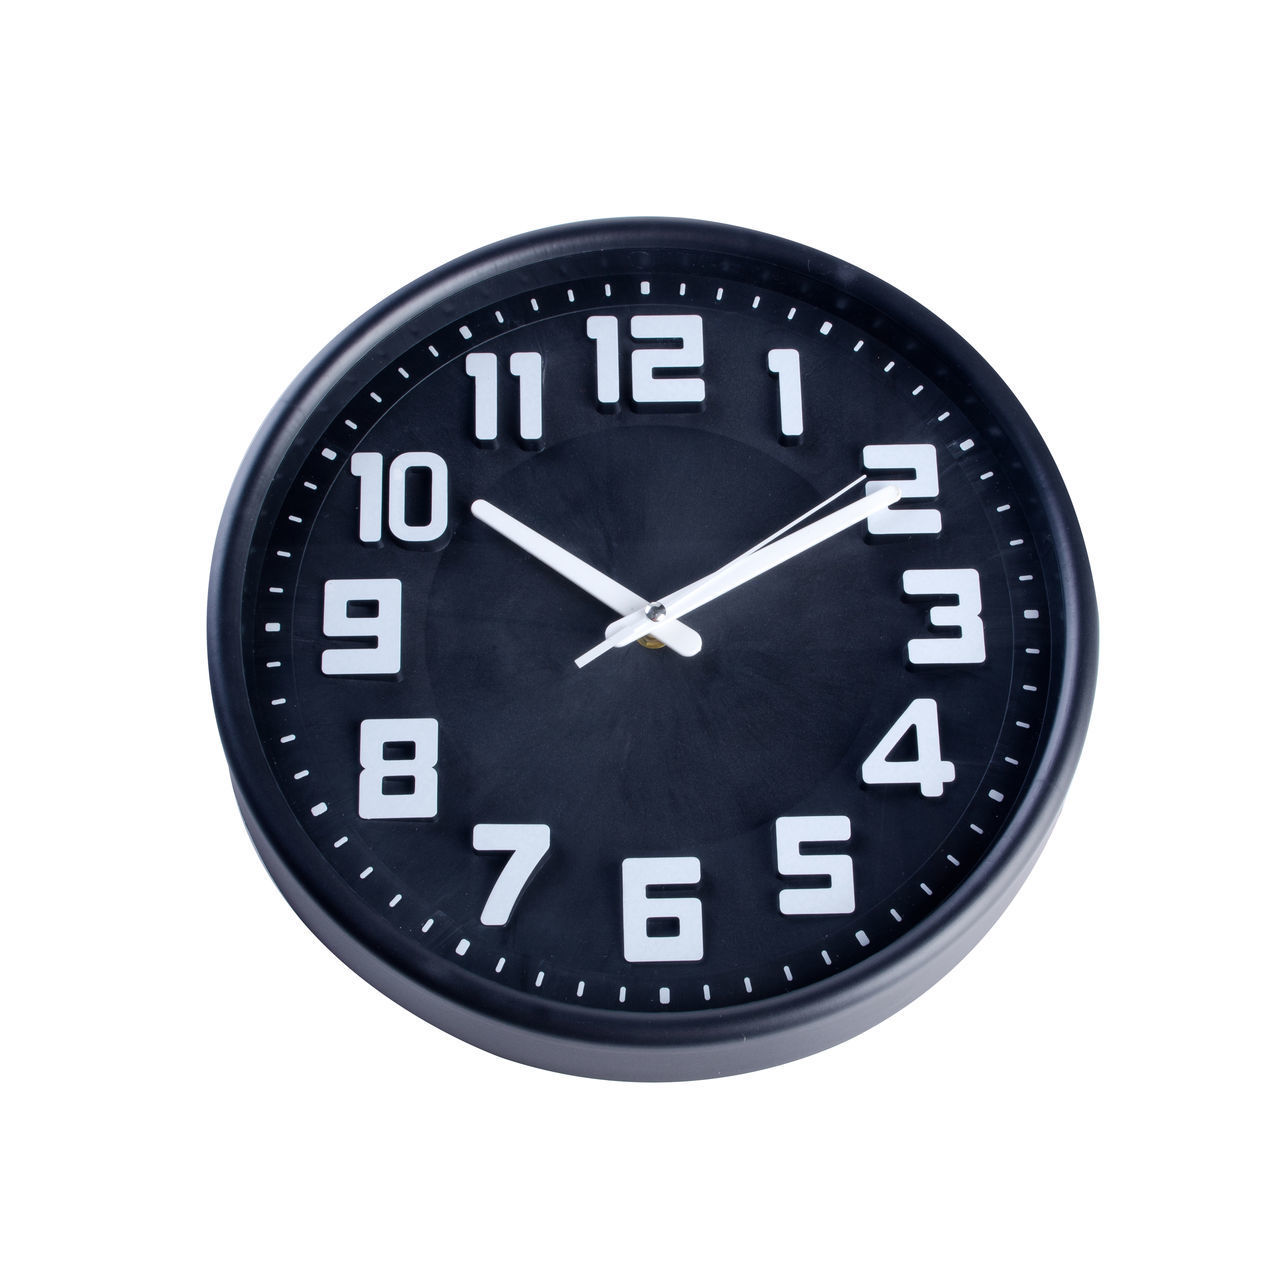 CLOSE-UP OF CLOCK OVER WHITE BACKGROUND